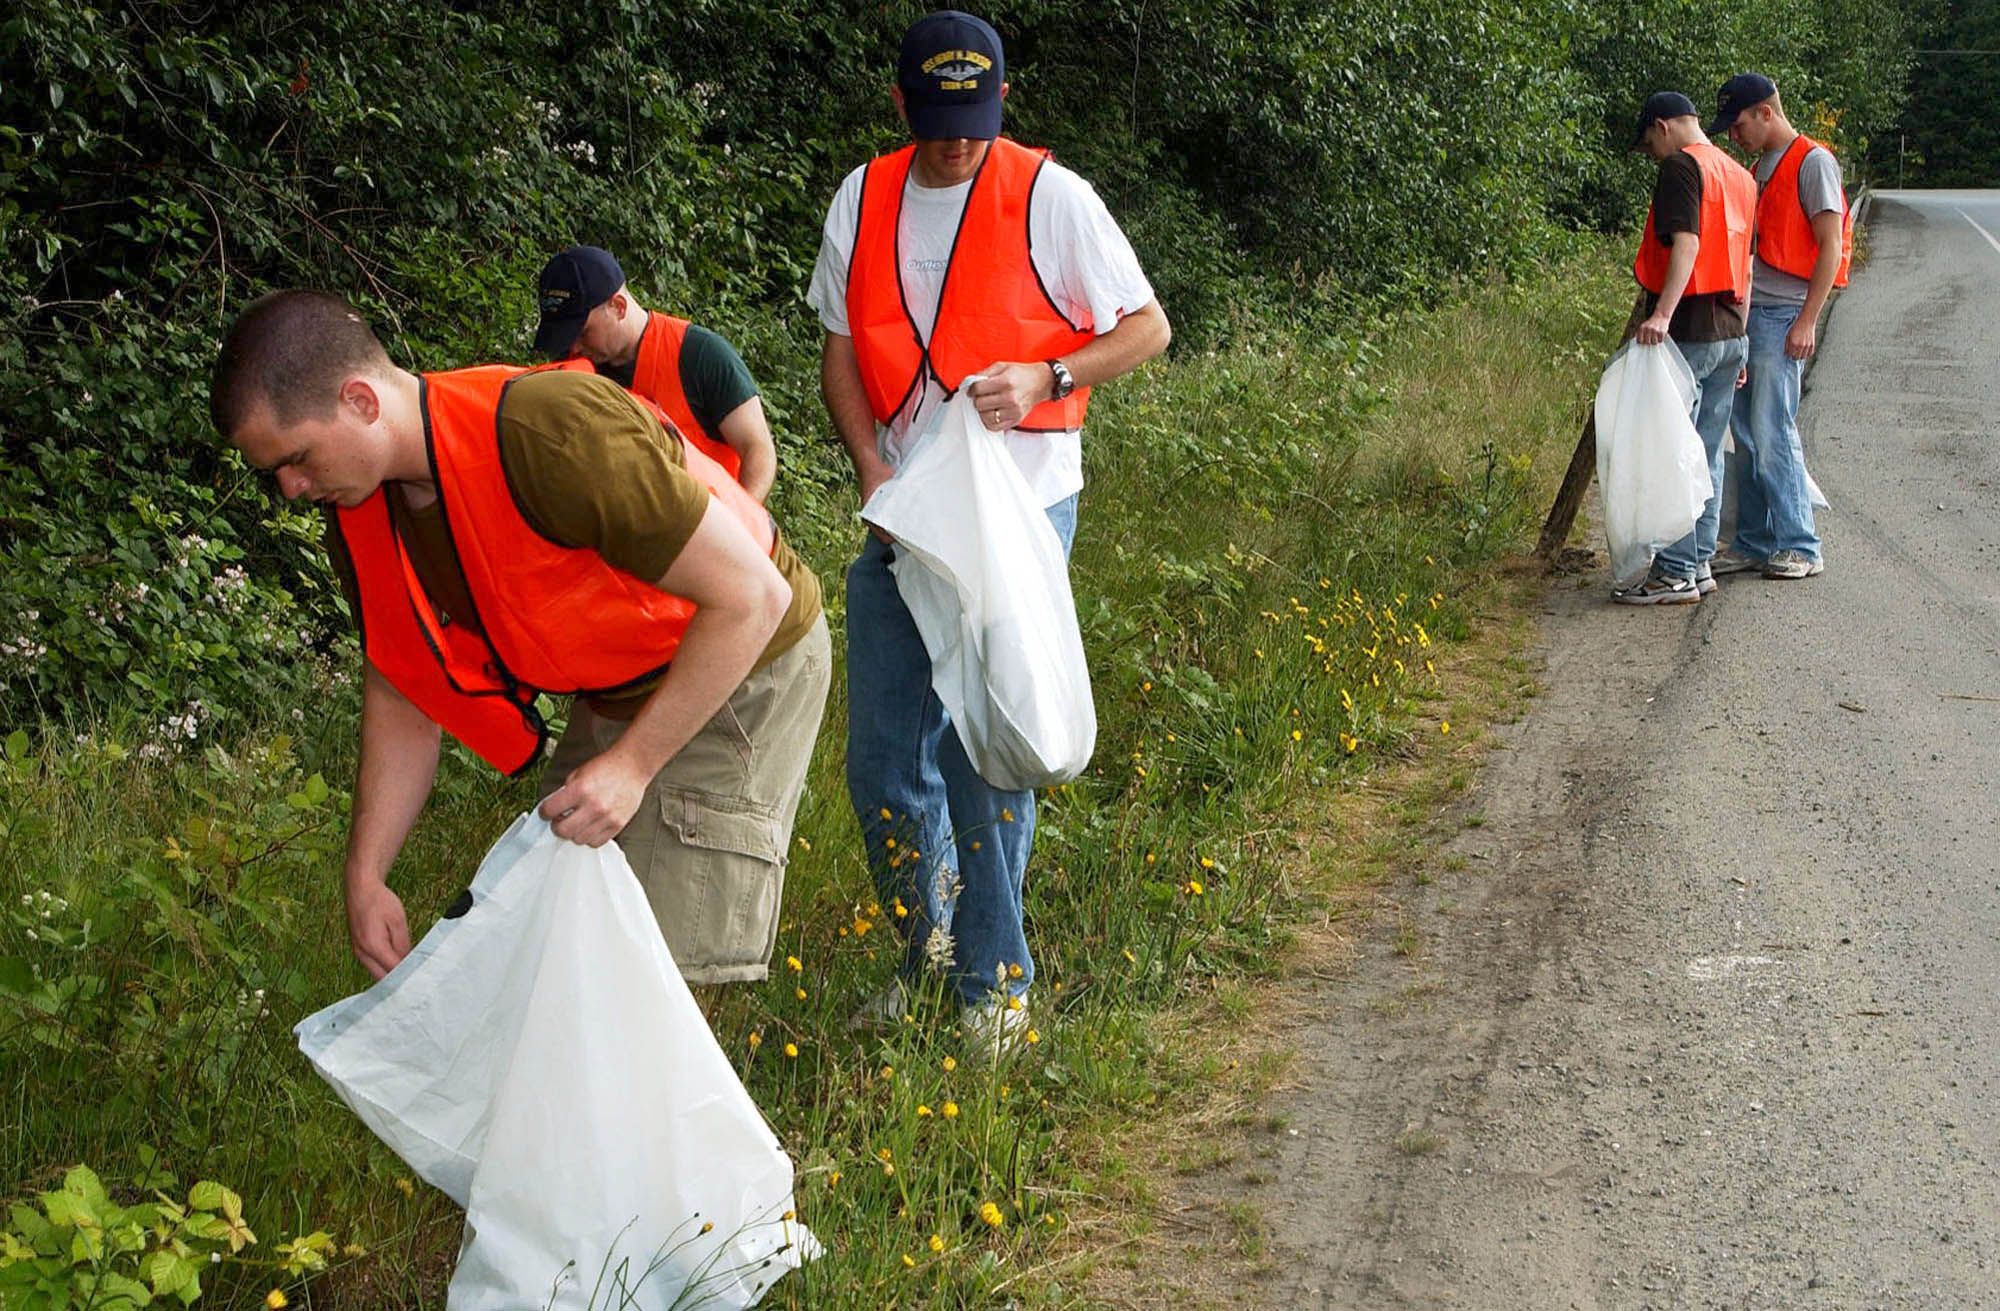 070622-N-2143T-002 POULSBO, Wash. (June 22, 2007) - Sailors assigned to USS Henry Jackson (SSBN 730) pick up litter along Highway 3 as part of WashingtonÕs Adopt-a-Highway program. The Adopt-a-Highway program is an anti-litter and roadside clean-up campaign intended to promote pride and local ownership in Washington State. U.S. Navy photo by Mass Communication Specialist 2nd Class Maebel Tinoko (RELEASED)